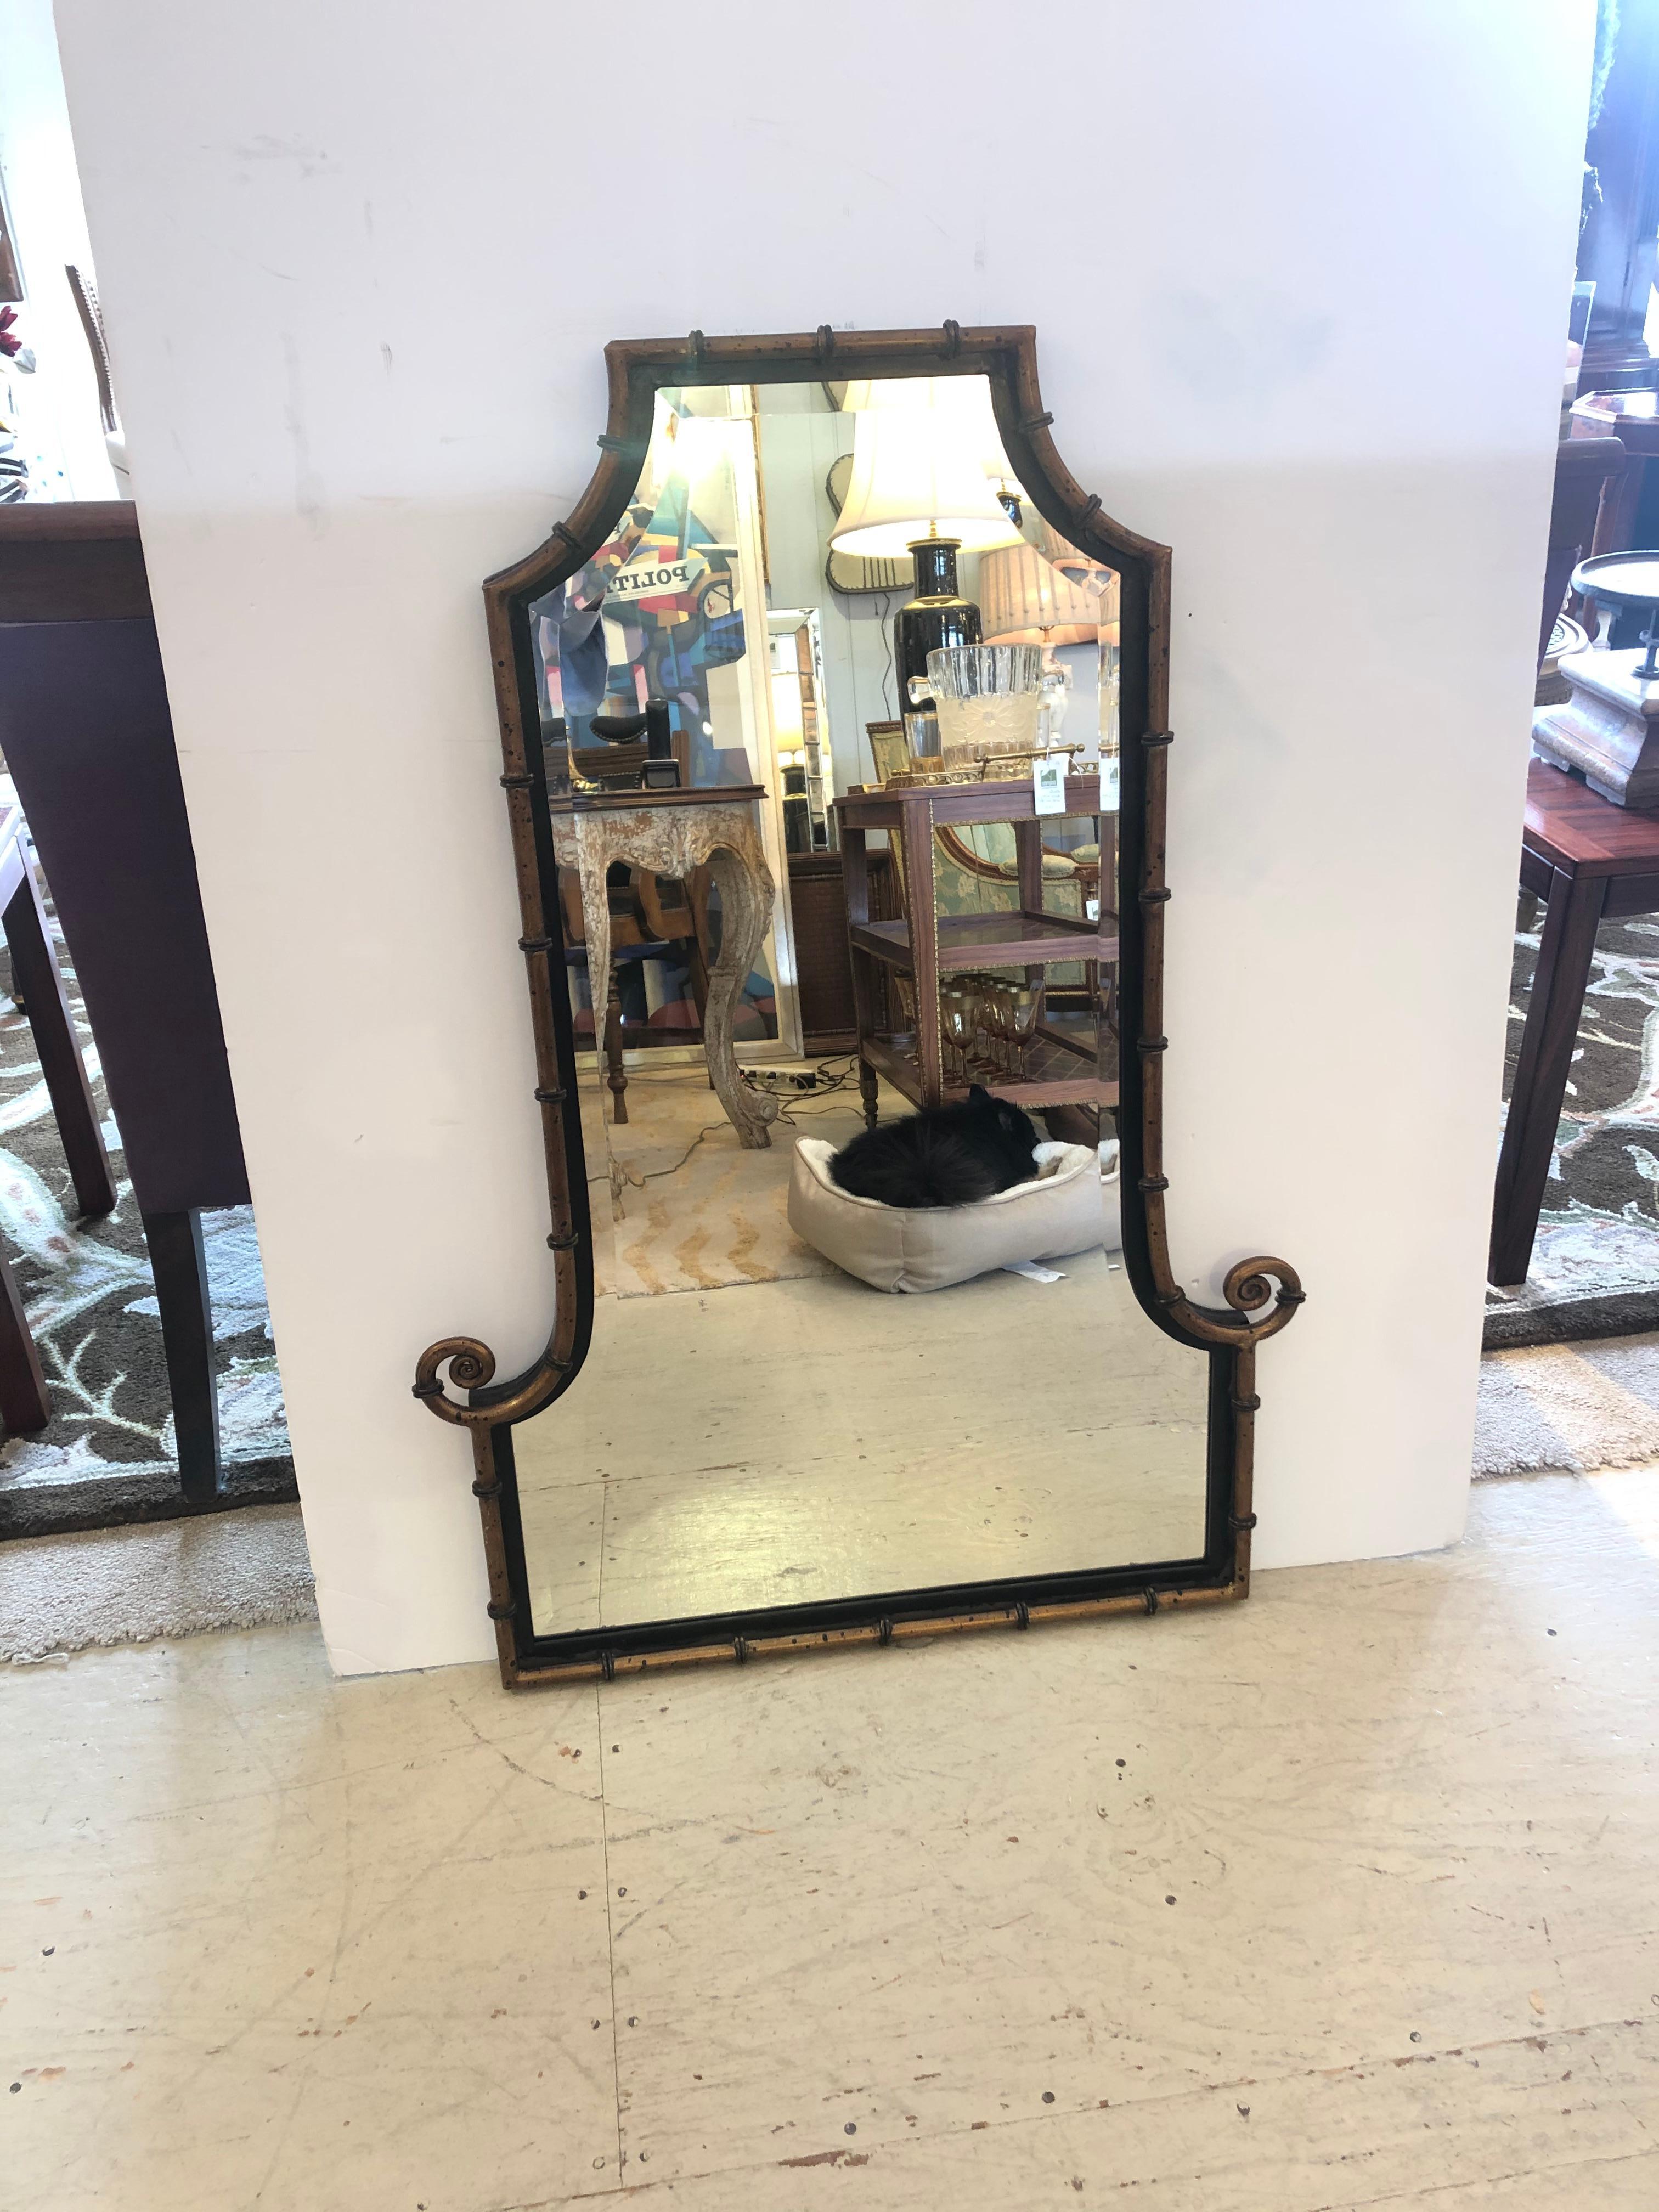 Stylish pagoda style mirror having antiqued bronze color on faux bamboo frame with black details and curlicues near the bottom. Beautiful beveled mirror.

Note: Pair is available, price upon request.